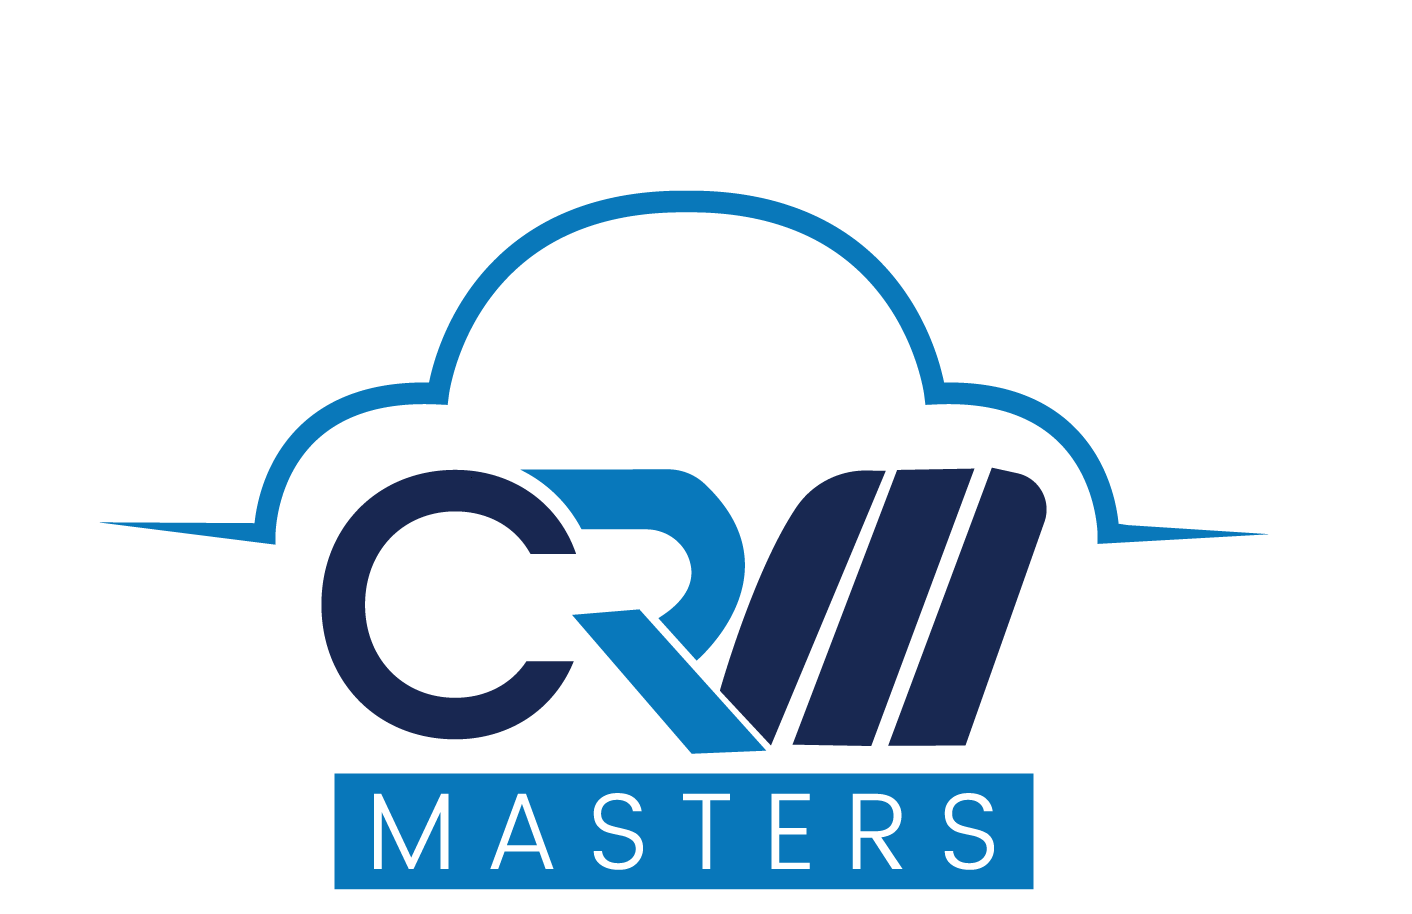 CRM MASTERS INFOTECH LLP in Elioplus